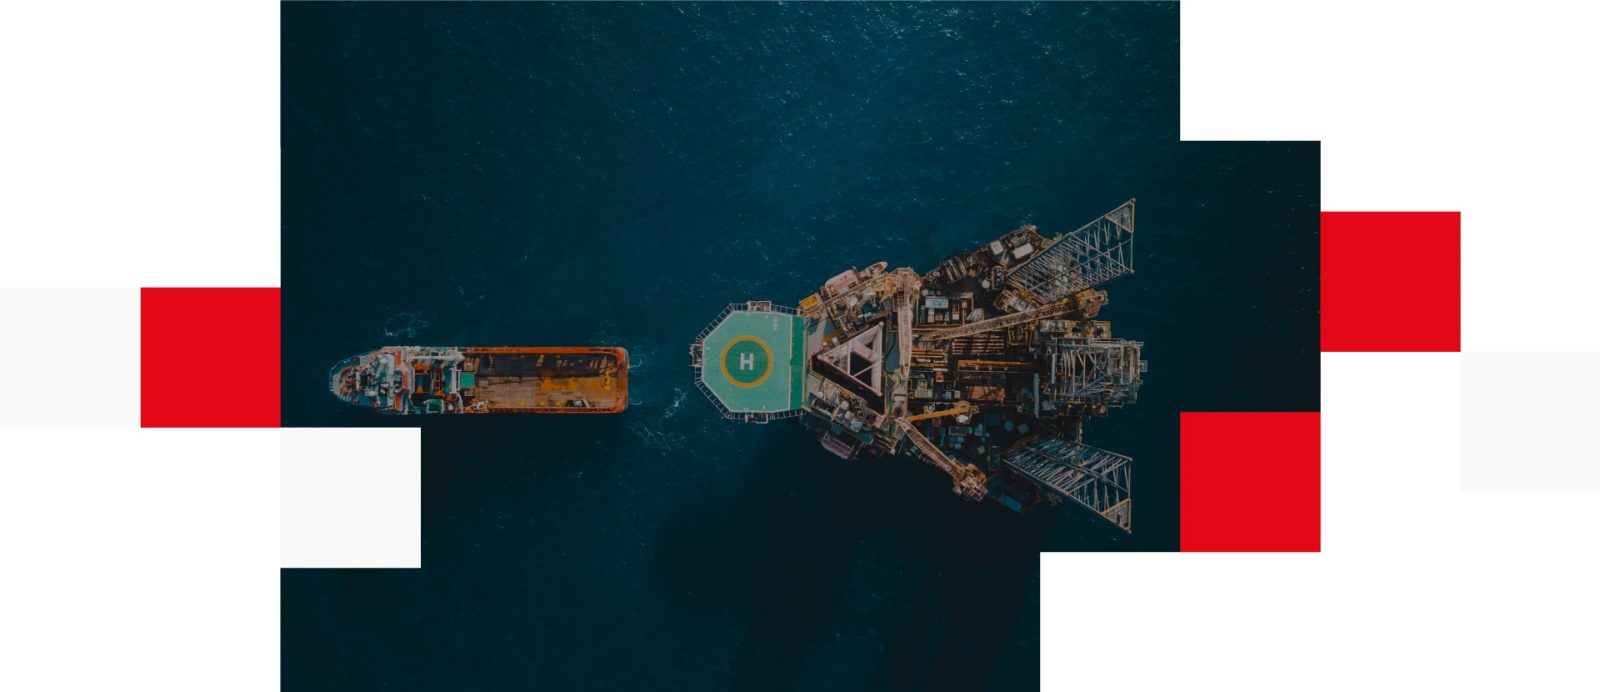 Aerial view of oil rig with towing vessel